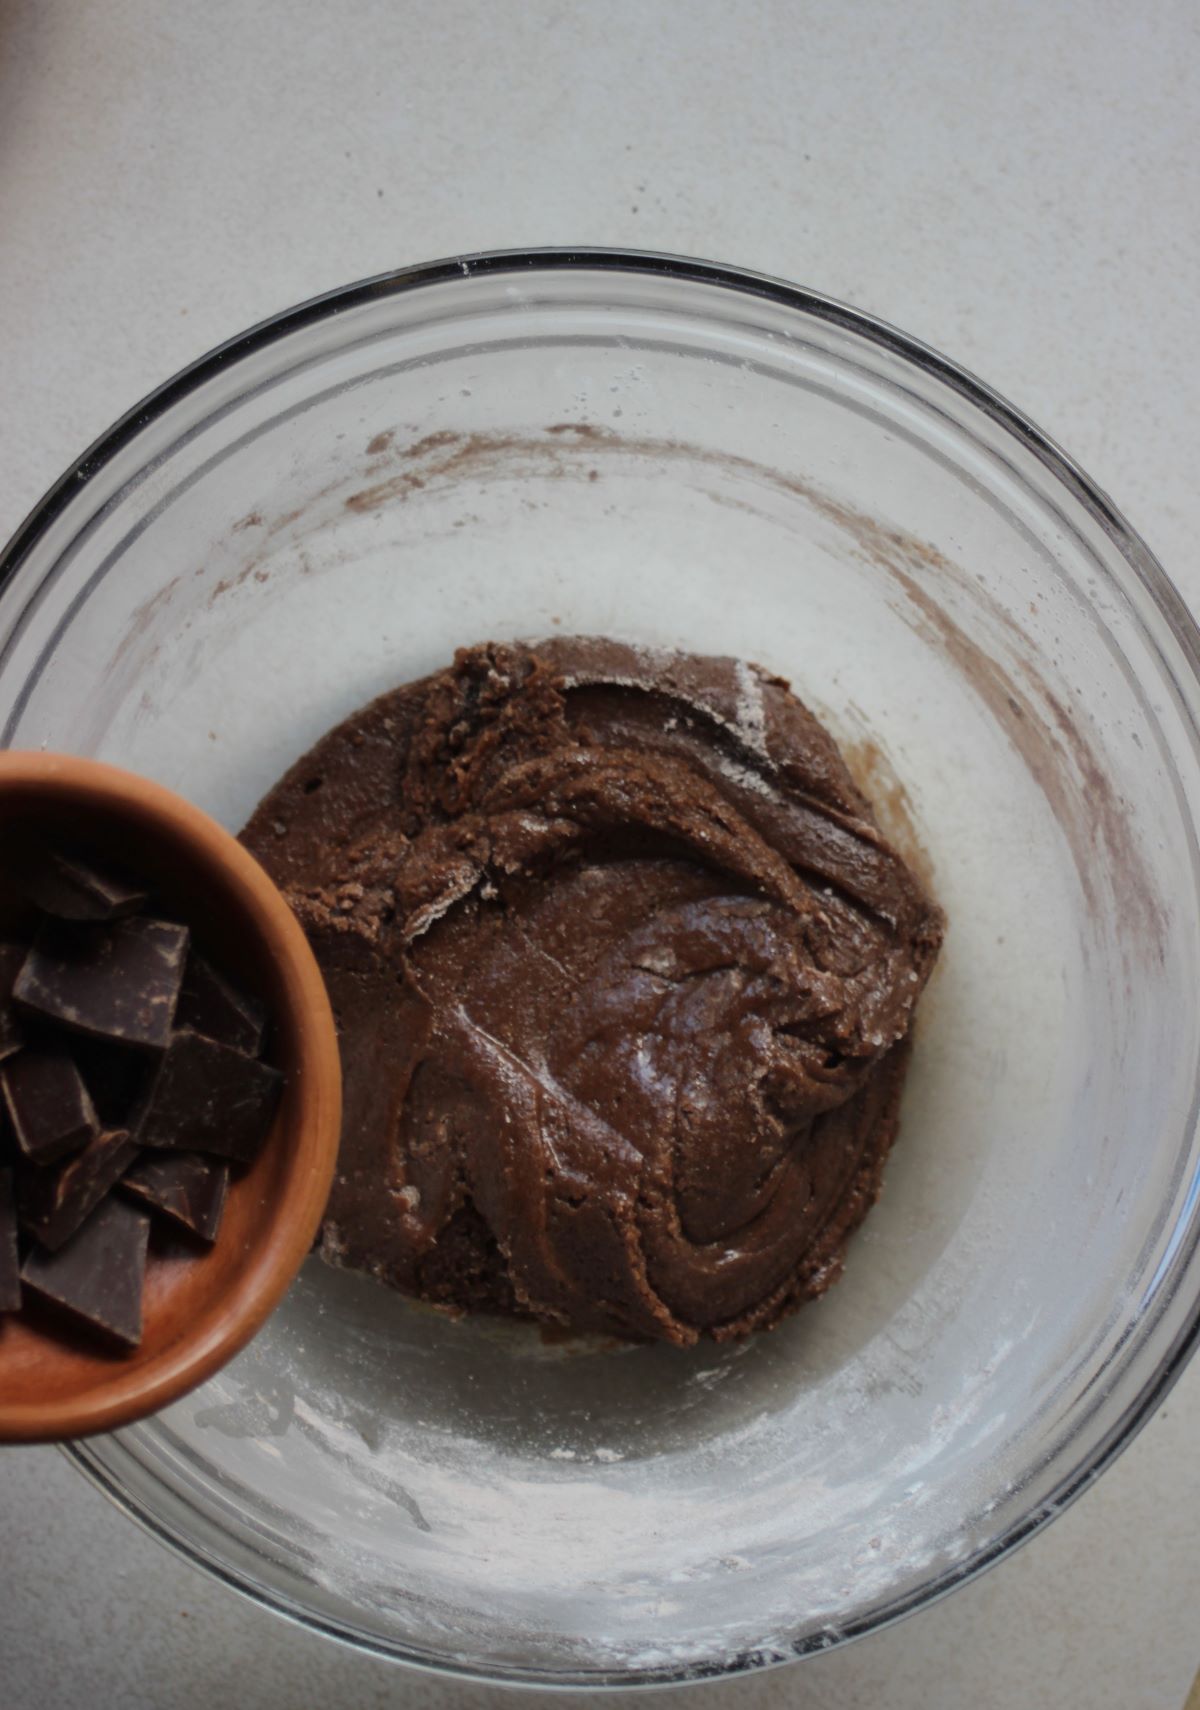 Bowl with chocolate chunks is about to be poured into a bowl with cookie dough.